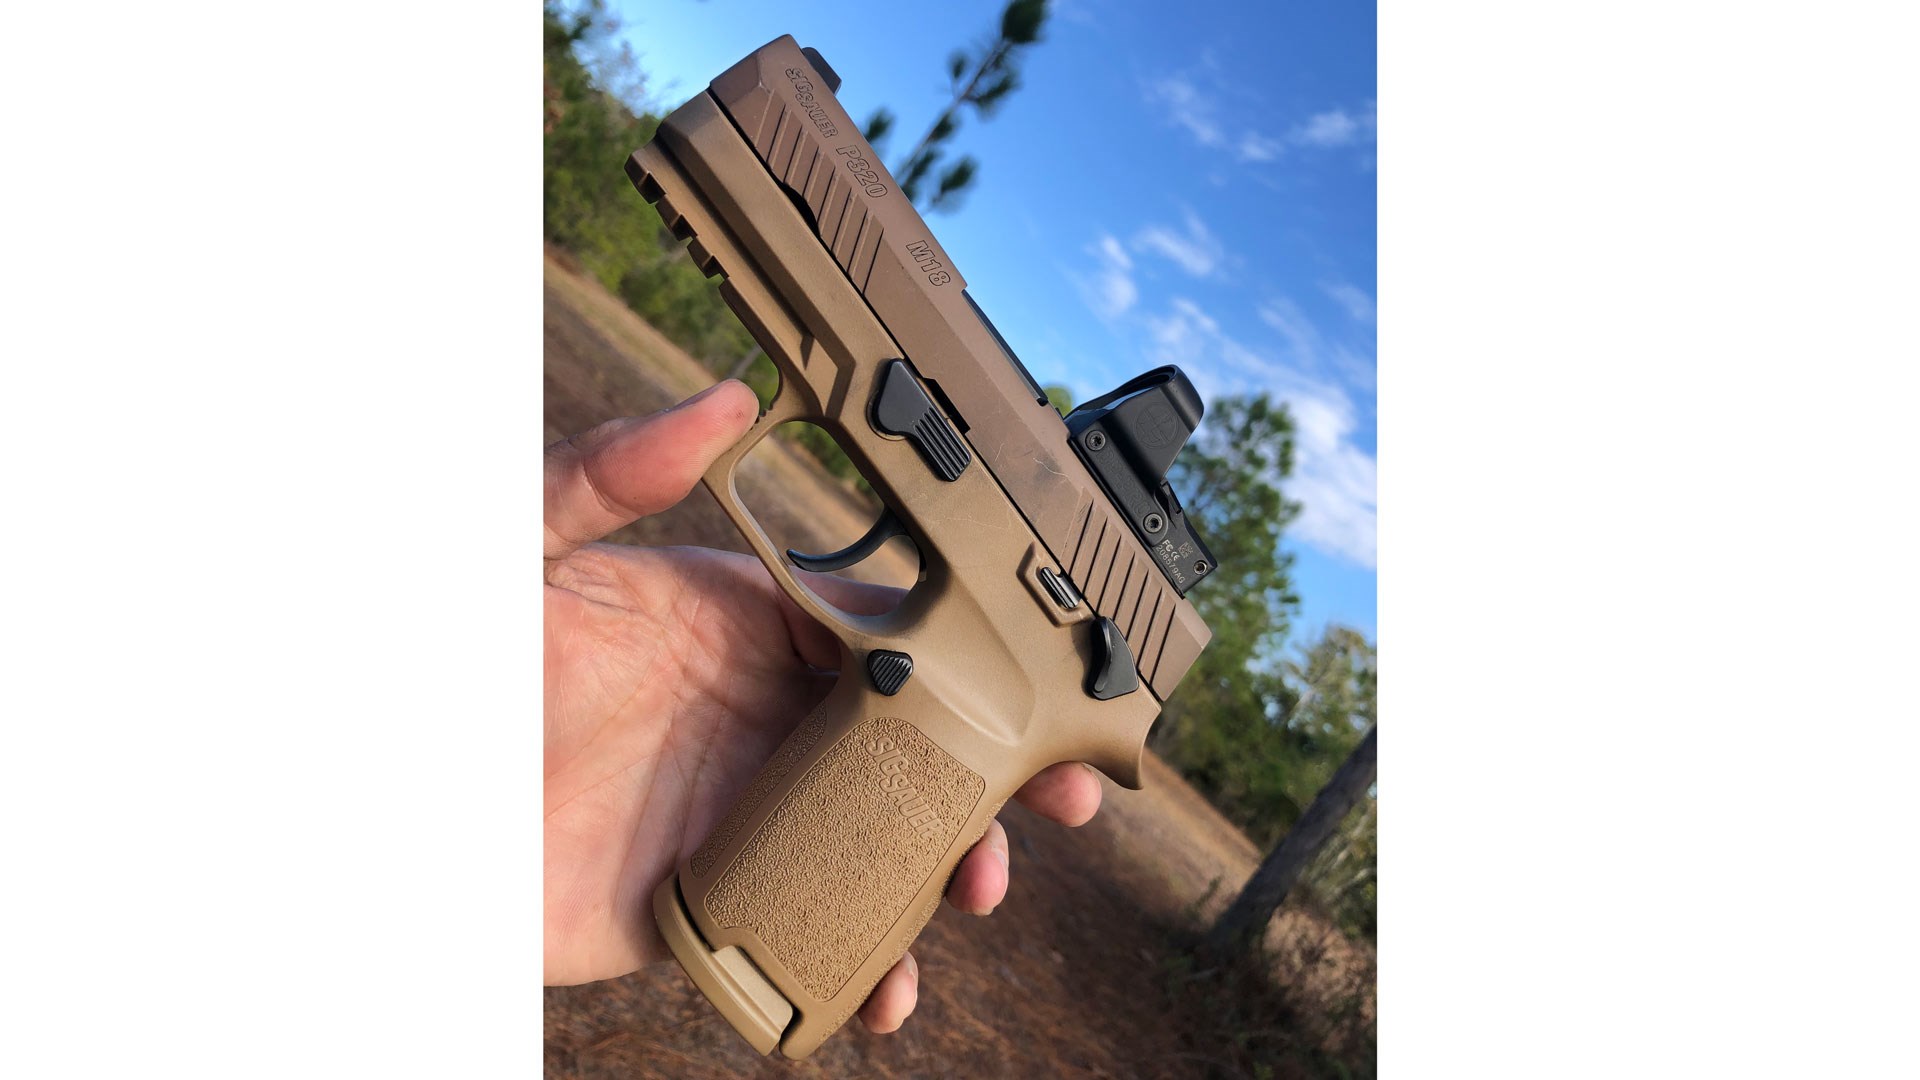 SIG Sauer M18 pistol in hand with optic outdoors blue sky trees